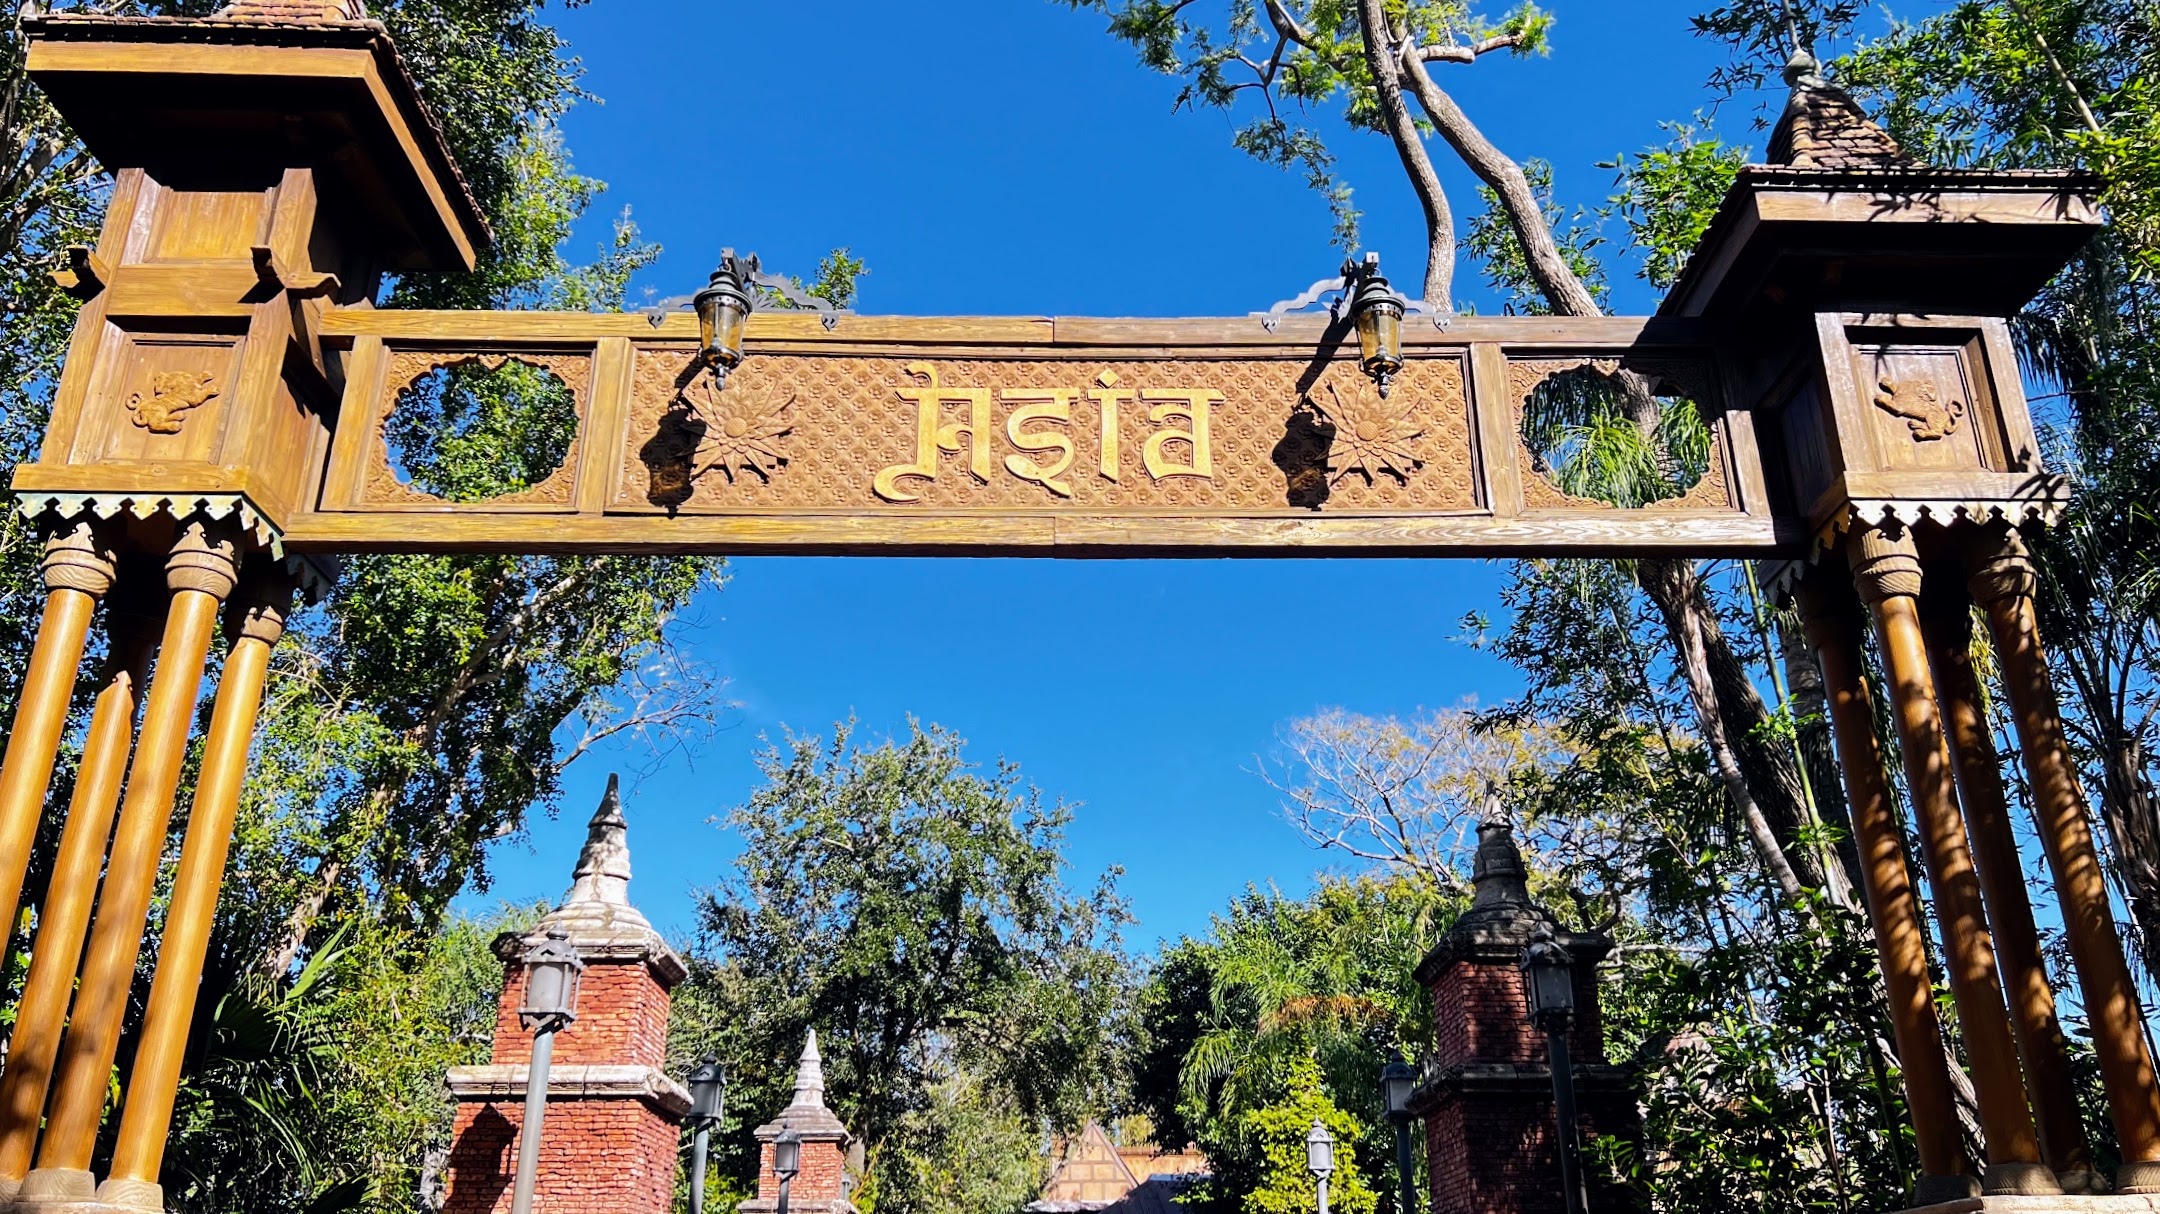 Asia at Animal Kingdom (Expedition Everest and more) - WDW Prep School